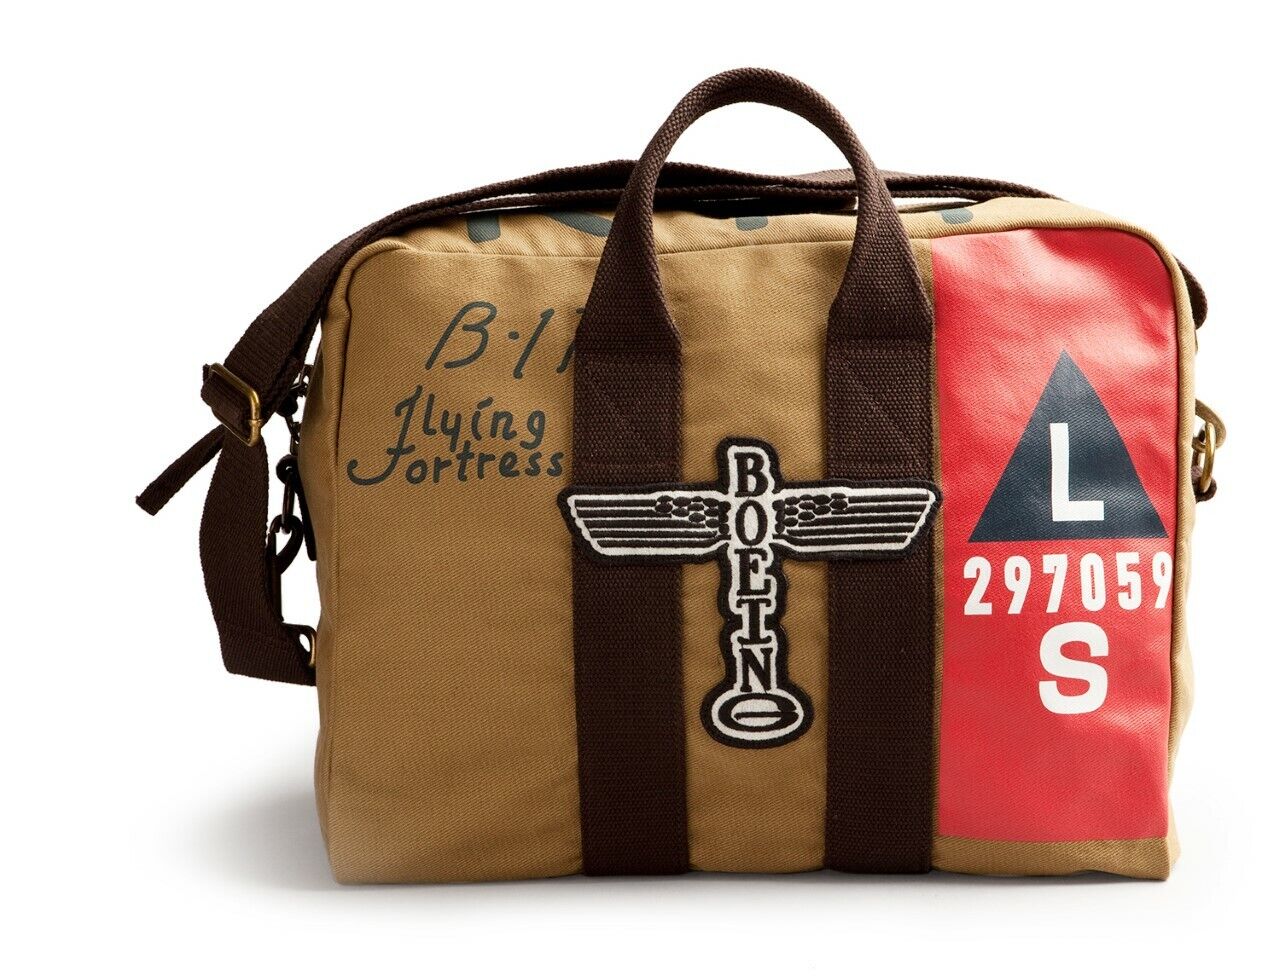 Boeing B-17 Flying Fortress Kit Bag, WWII Vintage Aviation  ACC-0110